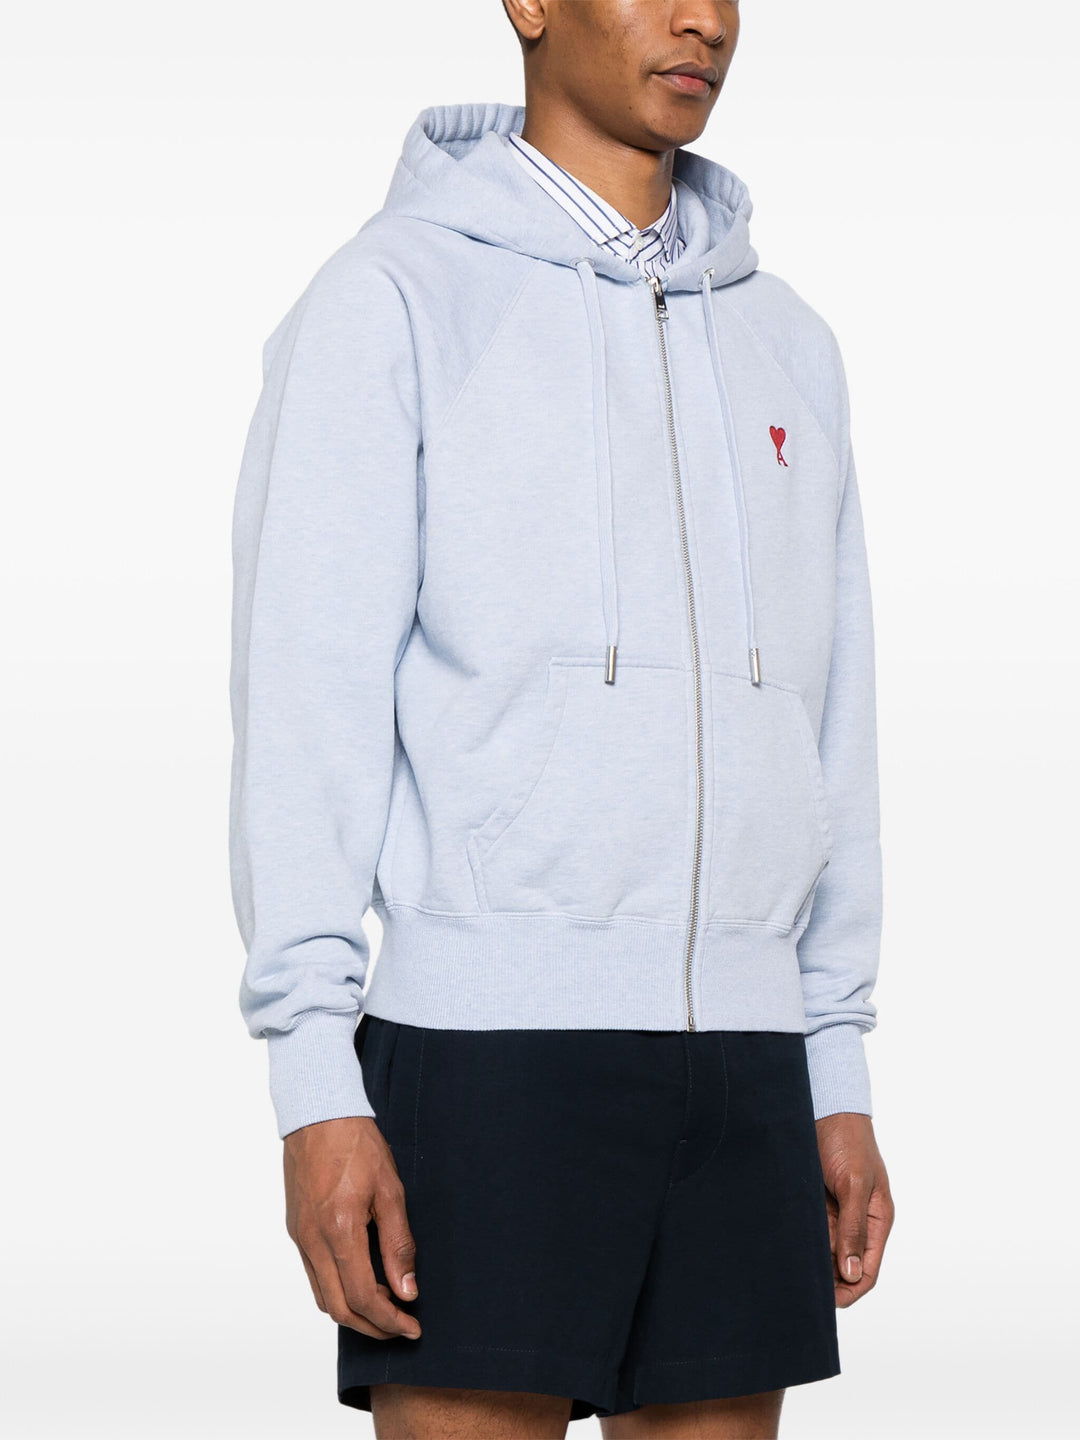 Red Adc Zipped Hoodie